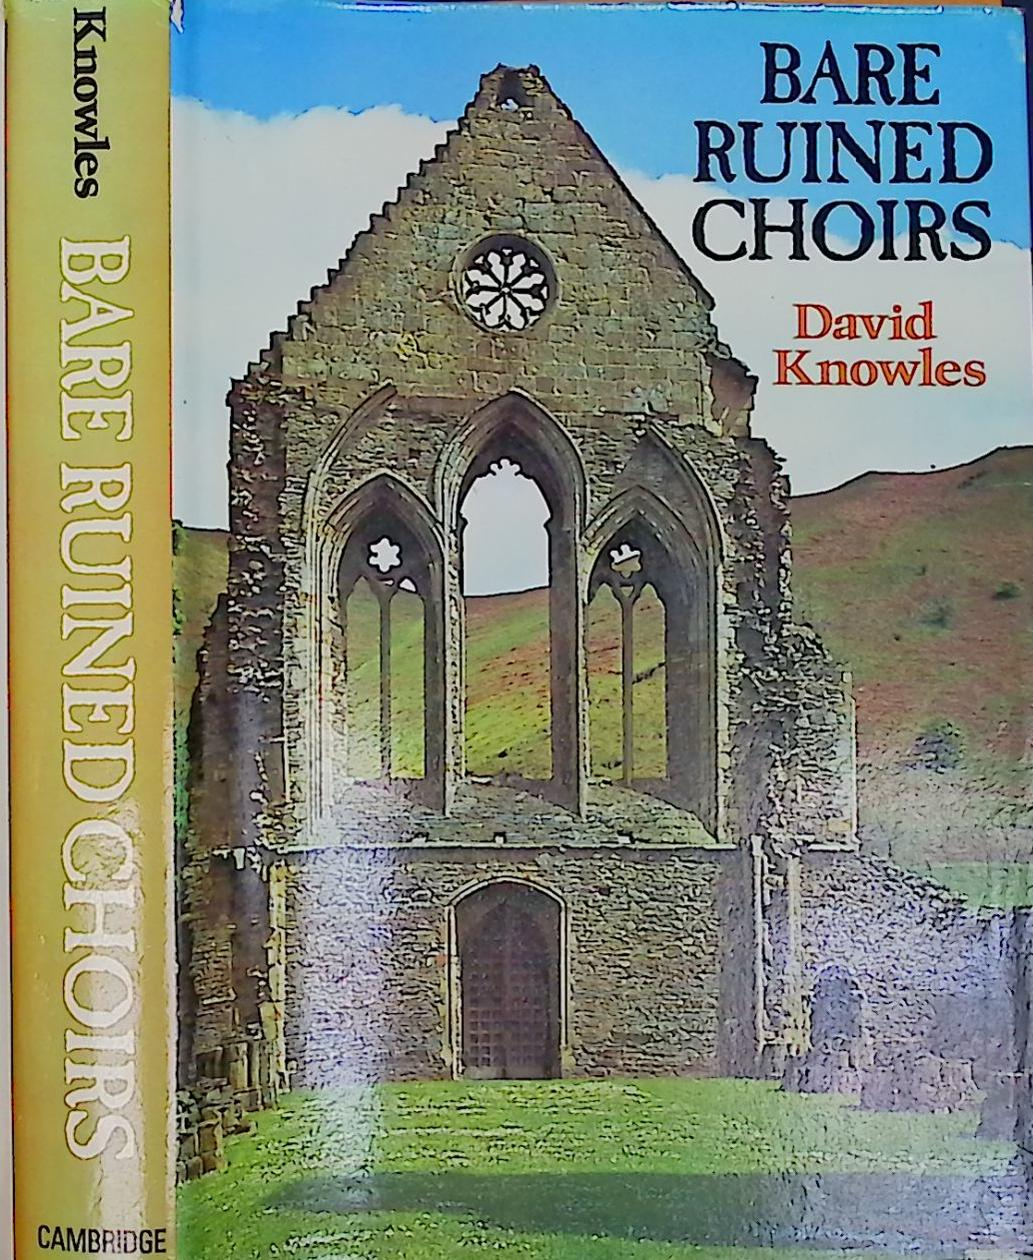 Bare Ruined Choirs. The Dissolution of the English Monasteries.